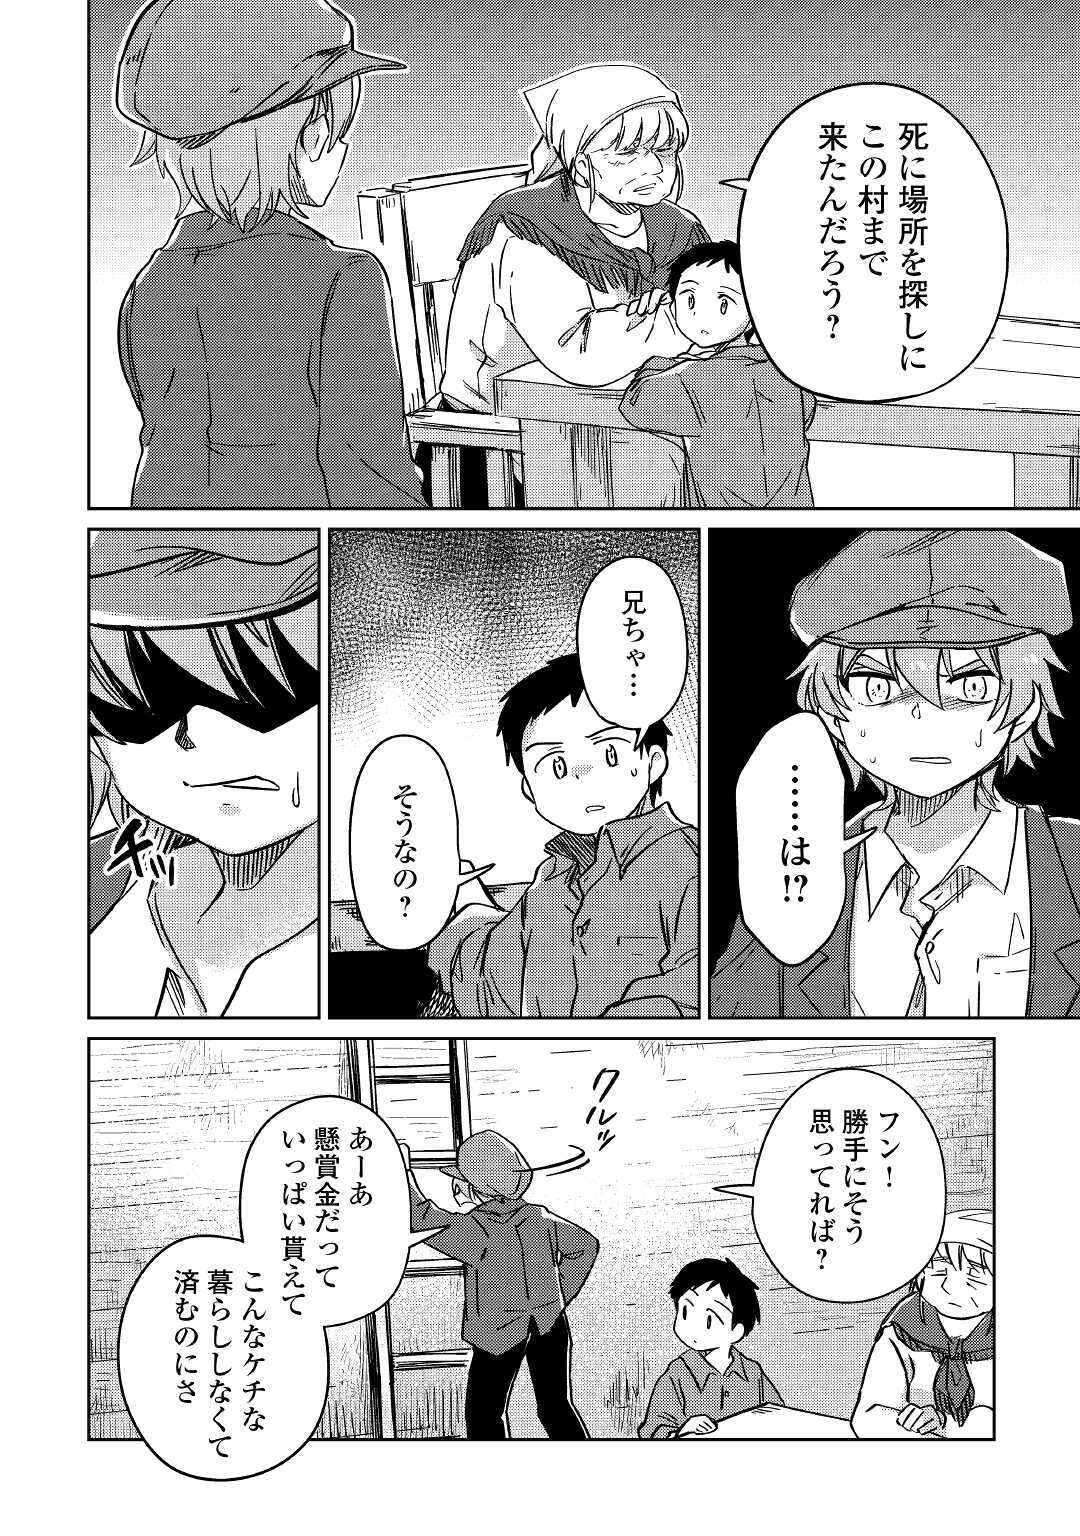 The Former Structural Researcher’s Story of Otherworldly Adventure 第29話 - Page 32